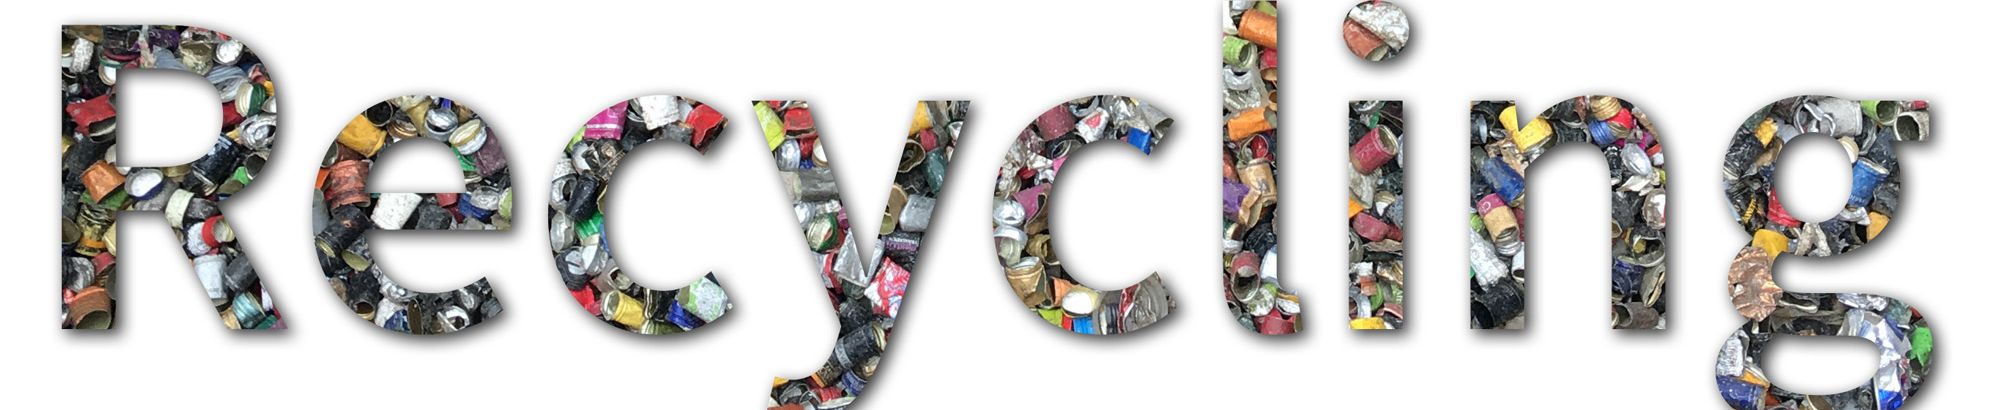 ACG Recycling Lettering